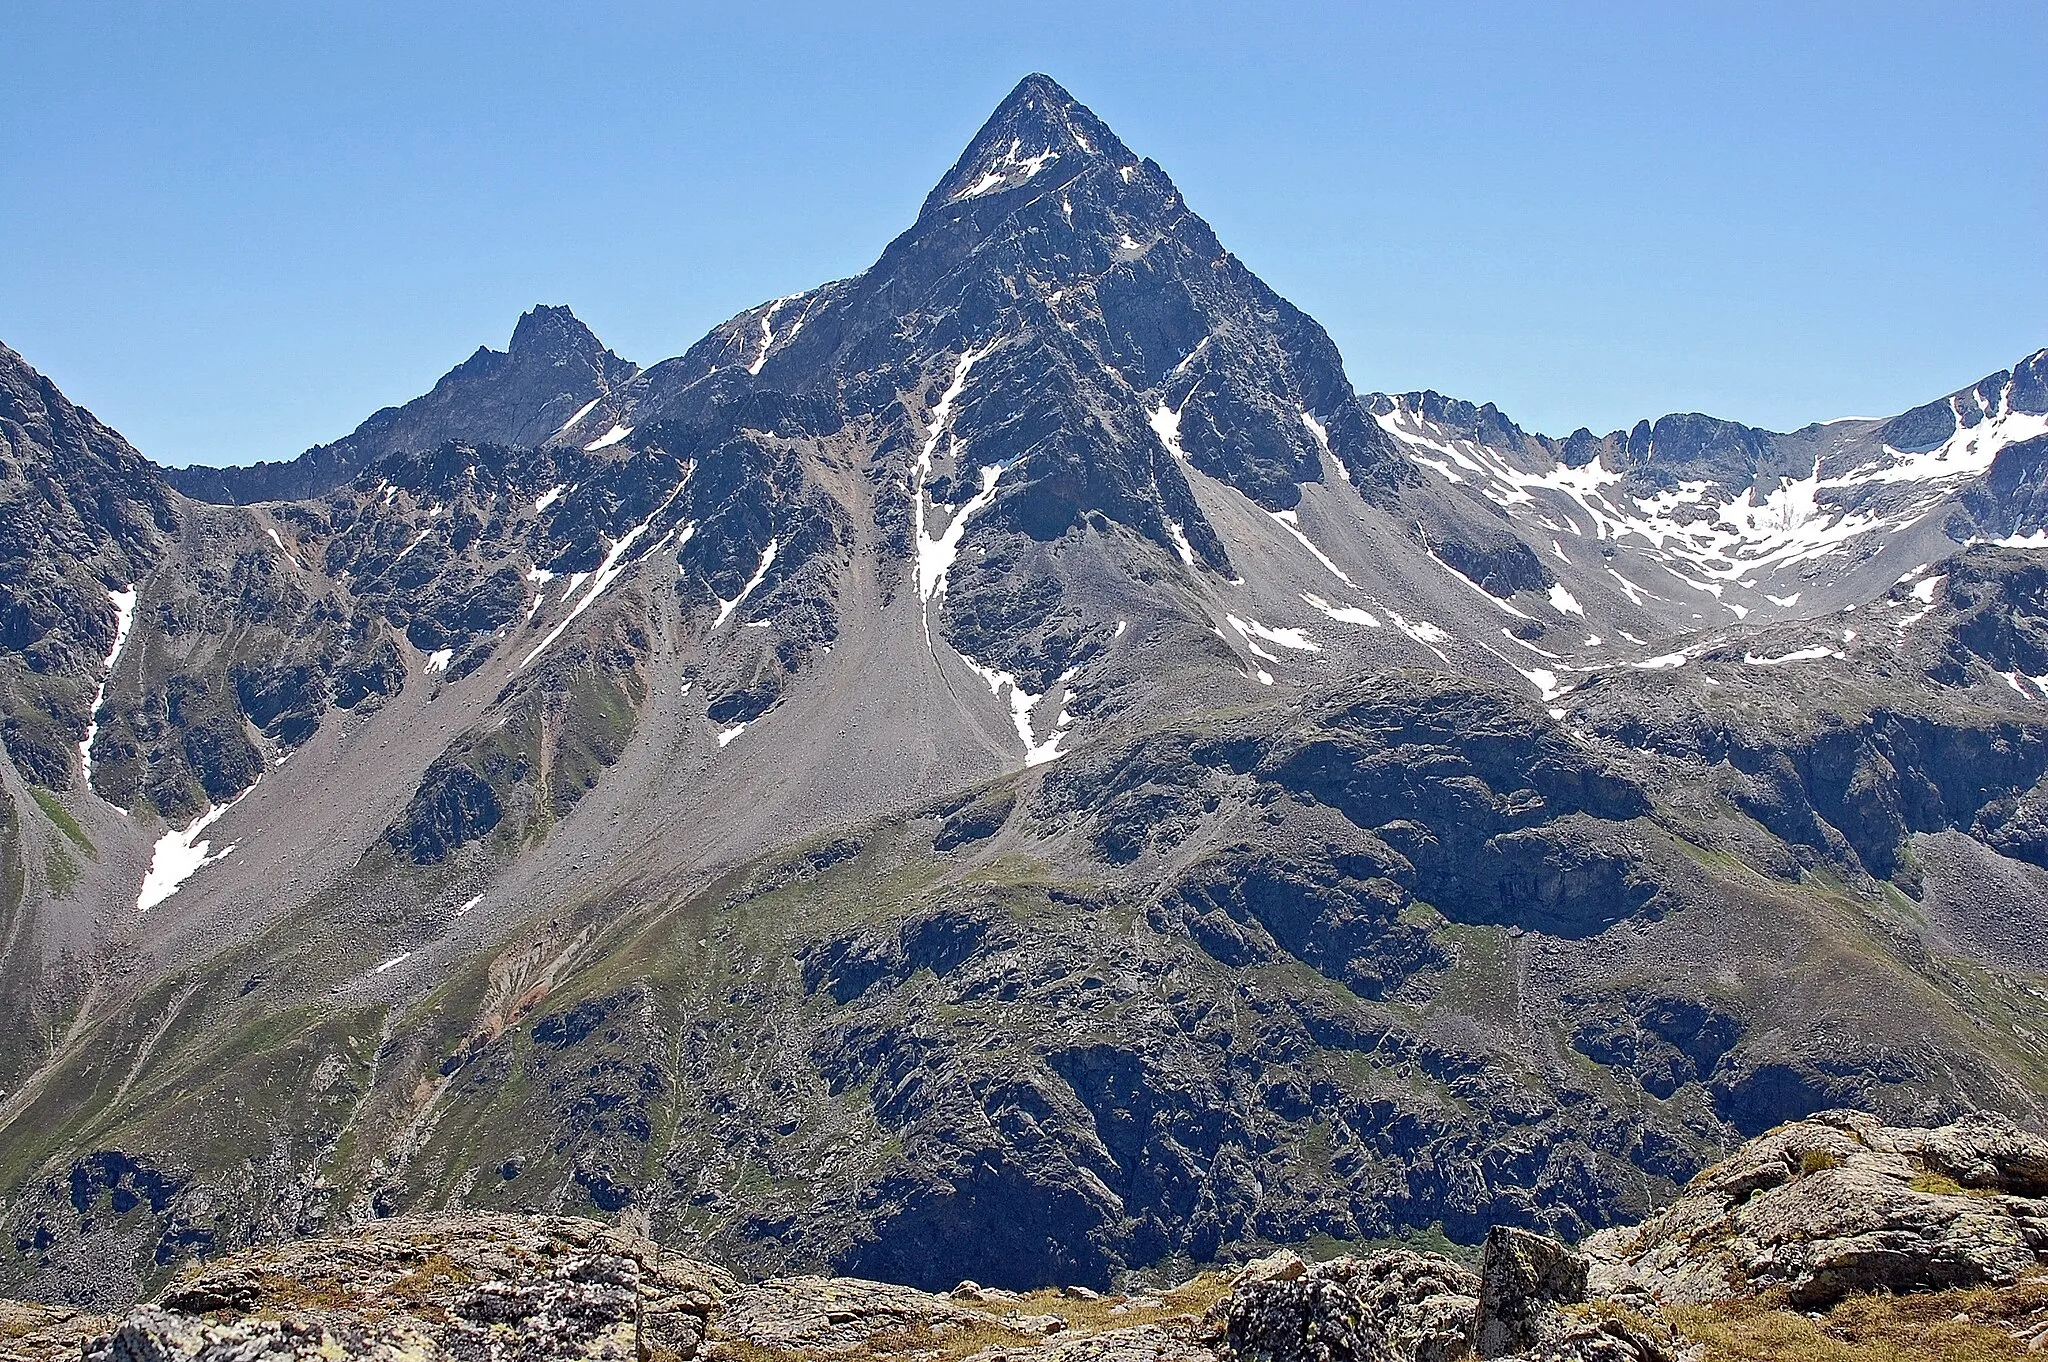 Photo showing: A rare view of Piz Ot (3246m/10650ft) from North. Piz Ot is more often photographed from South. At Fuorcla Crap Alv I was climbing a little further uphill just for getting this viewing angle.

Die Nordseite des Piz Ot, aus der Nähe von Fuorcla Crap Alv aufgenommen